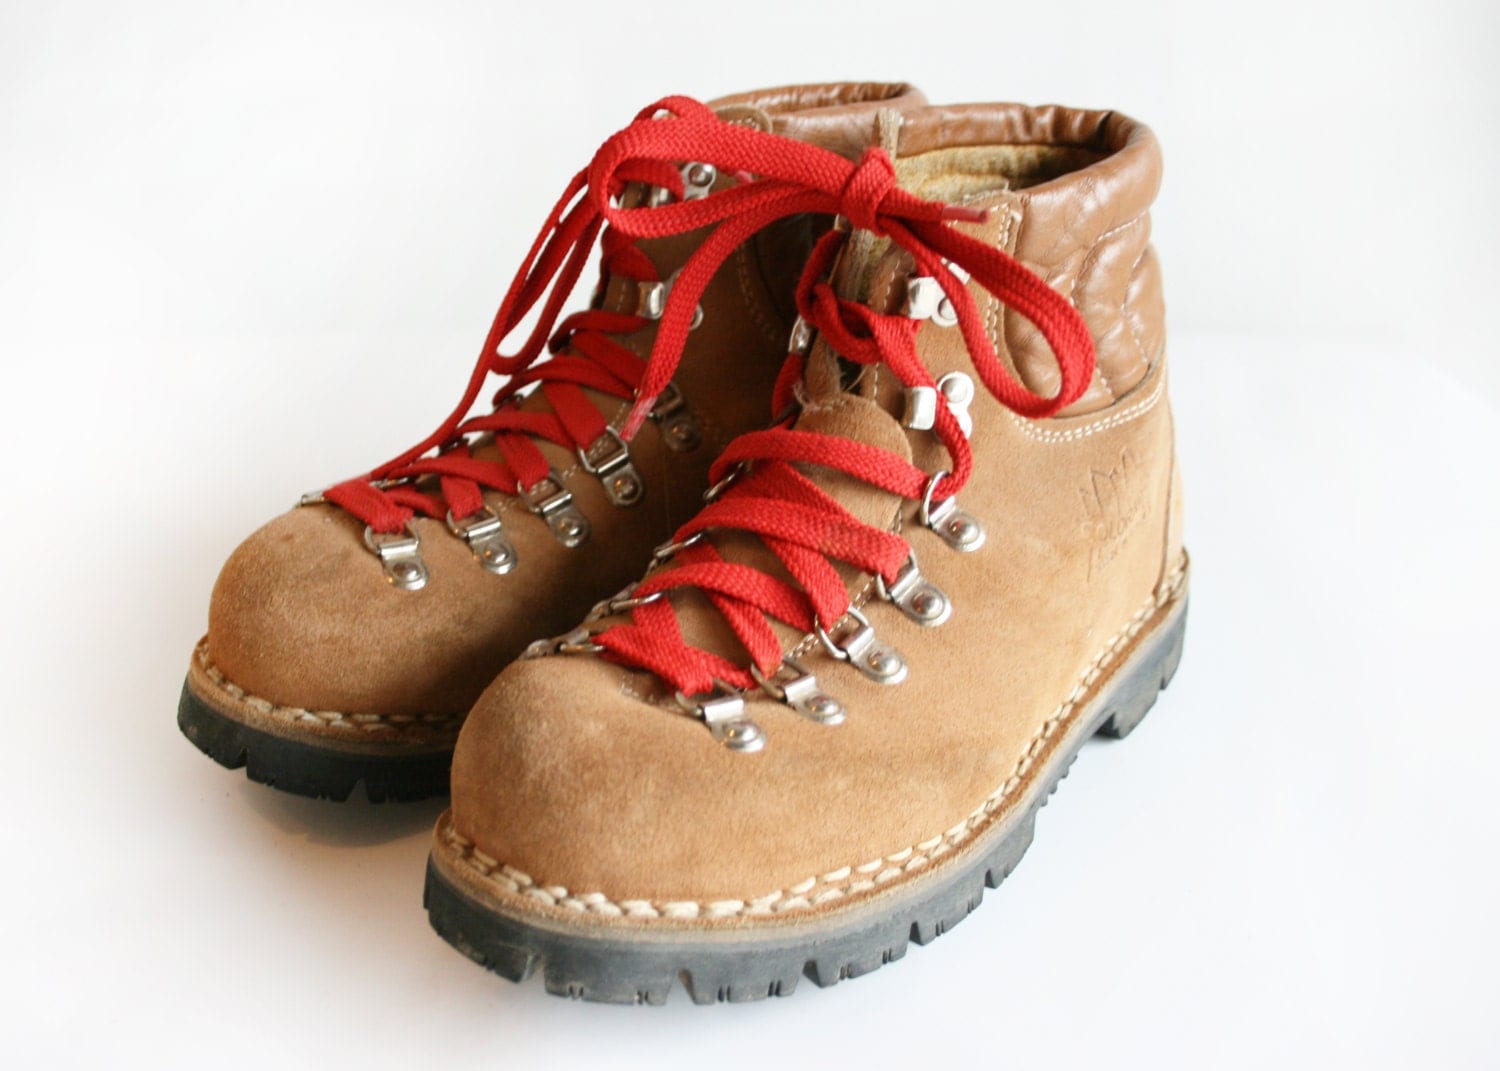 Vintage Colorado Suede Leather Hiking Boots Made In by anystore